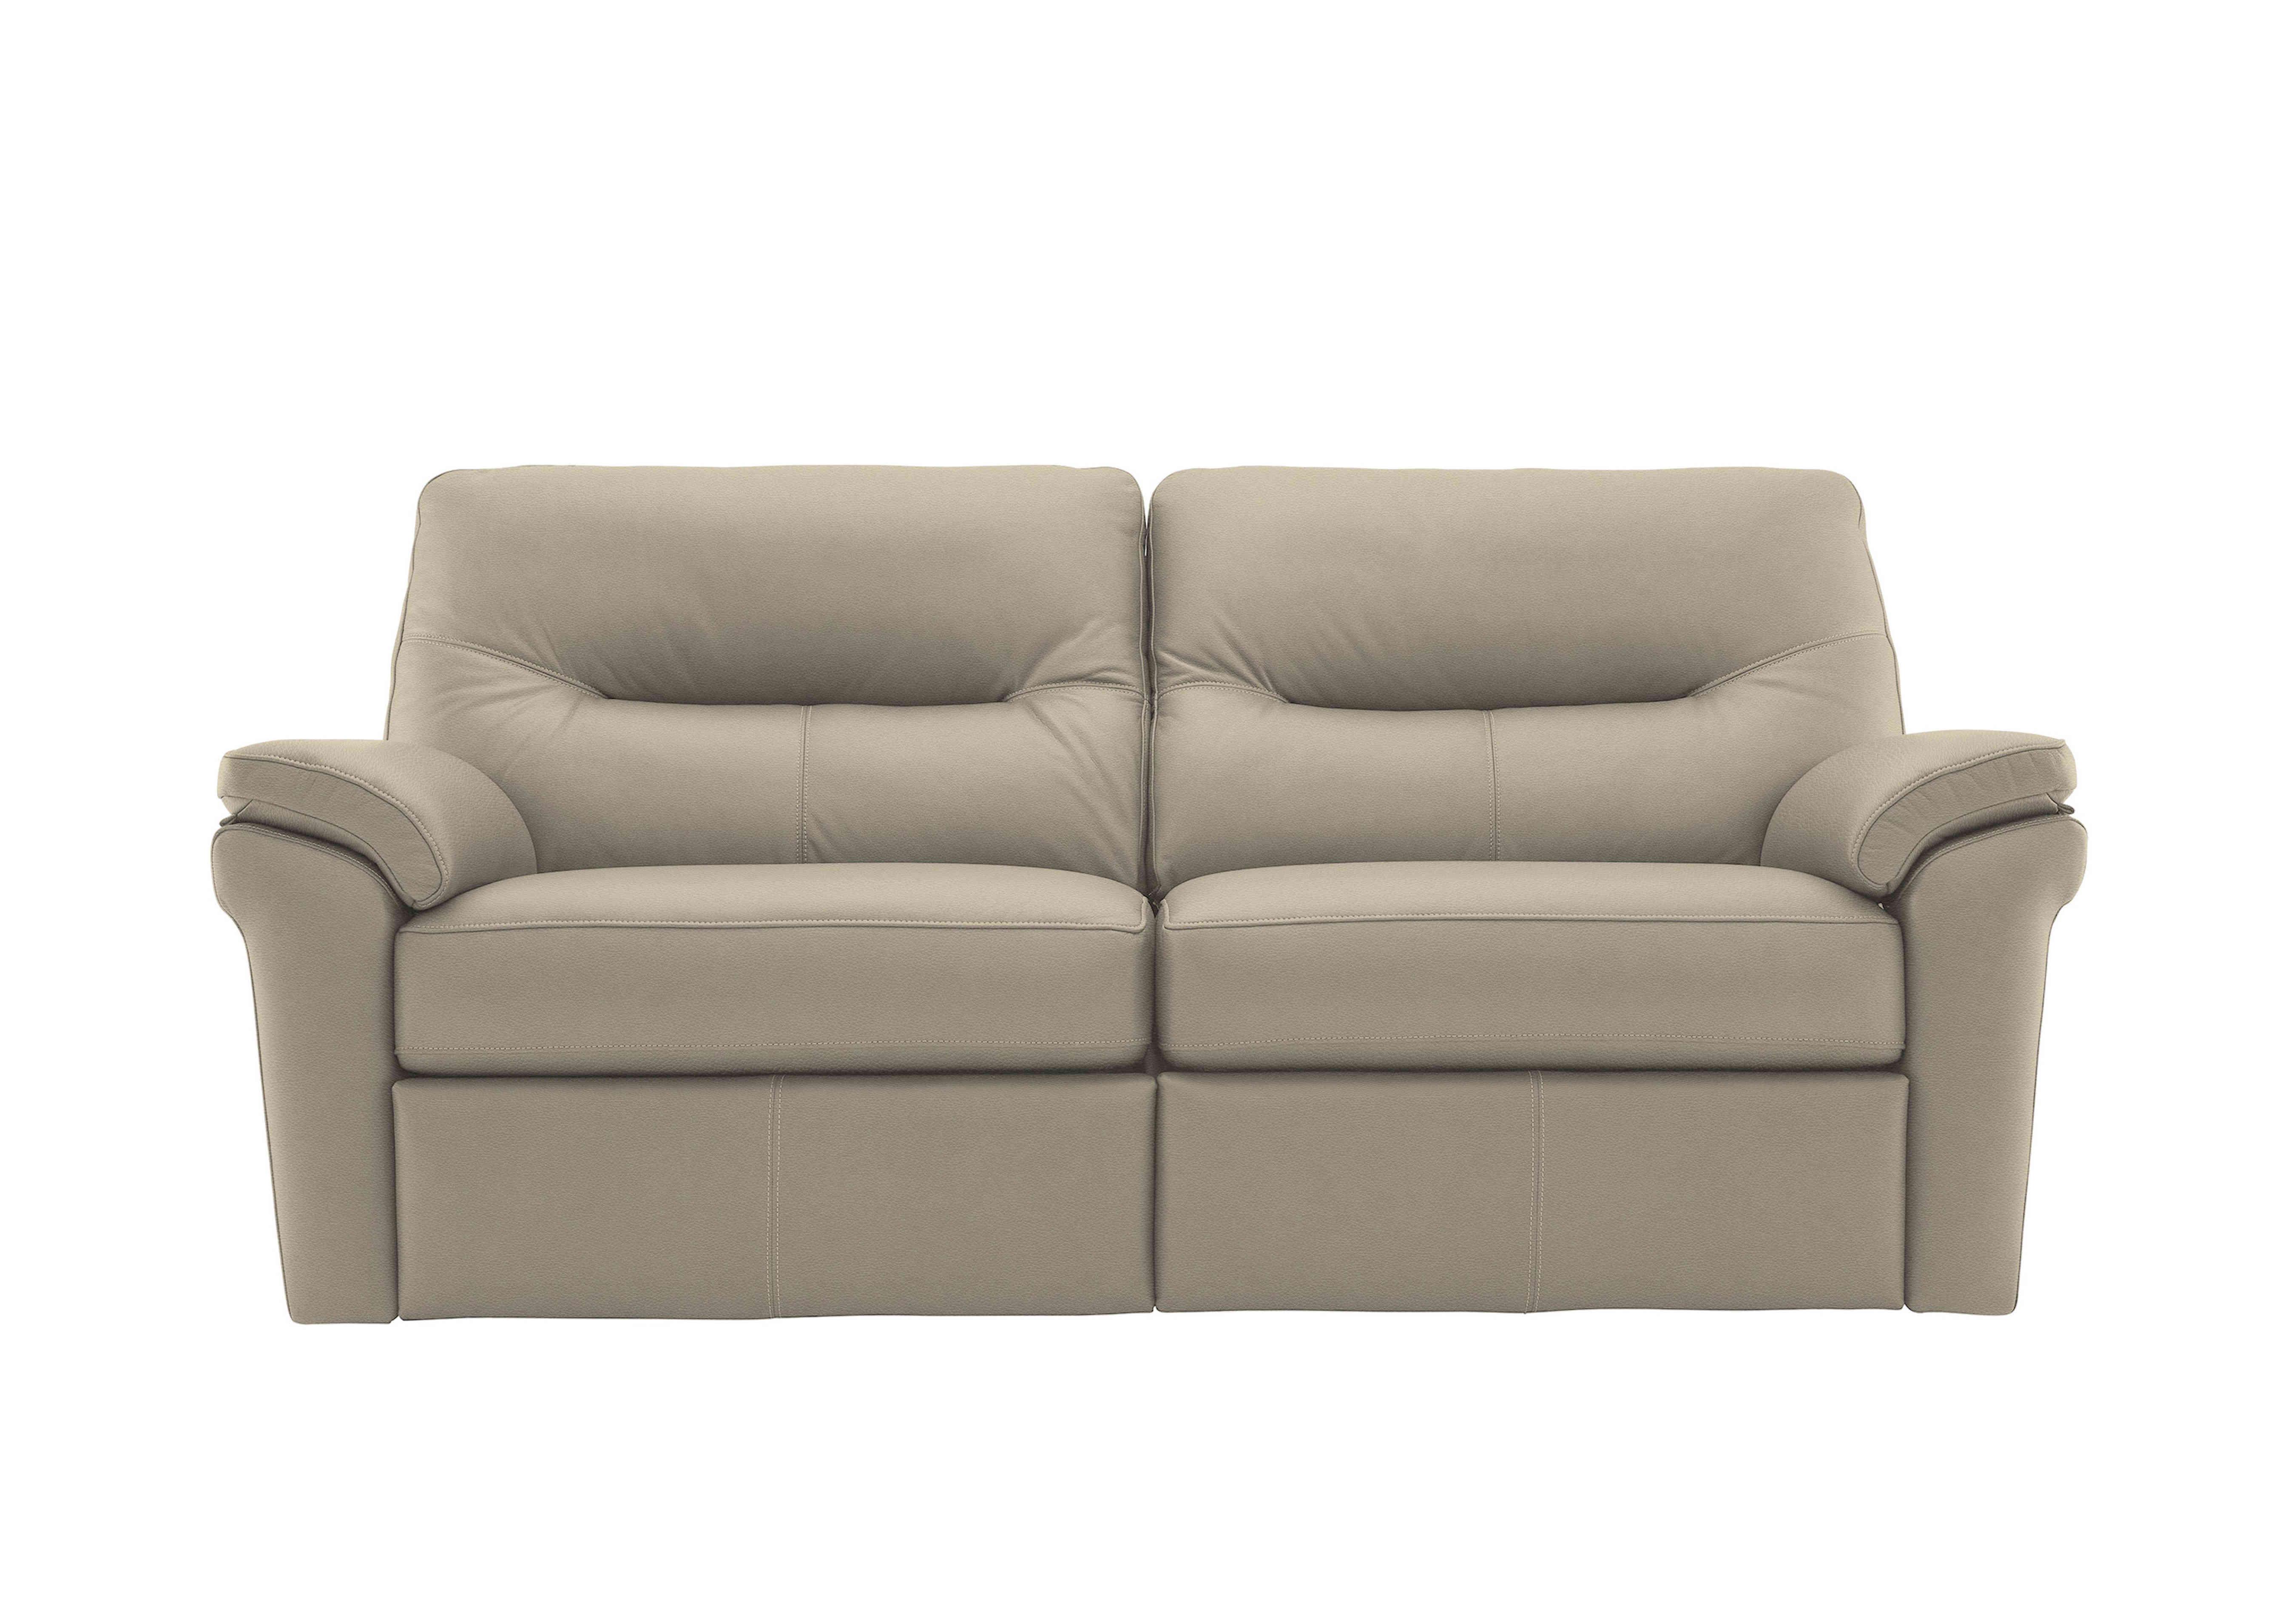 Seattle 3 Seater Leather Sofa in H001 Oxford Mushroom on Furniture Village